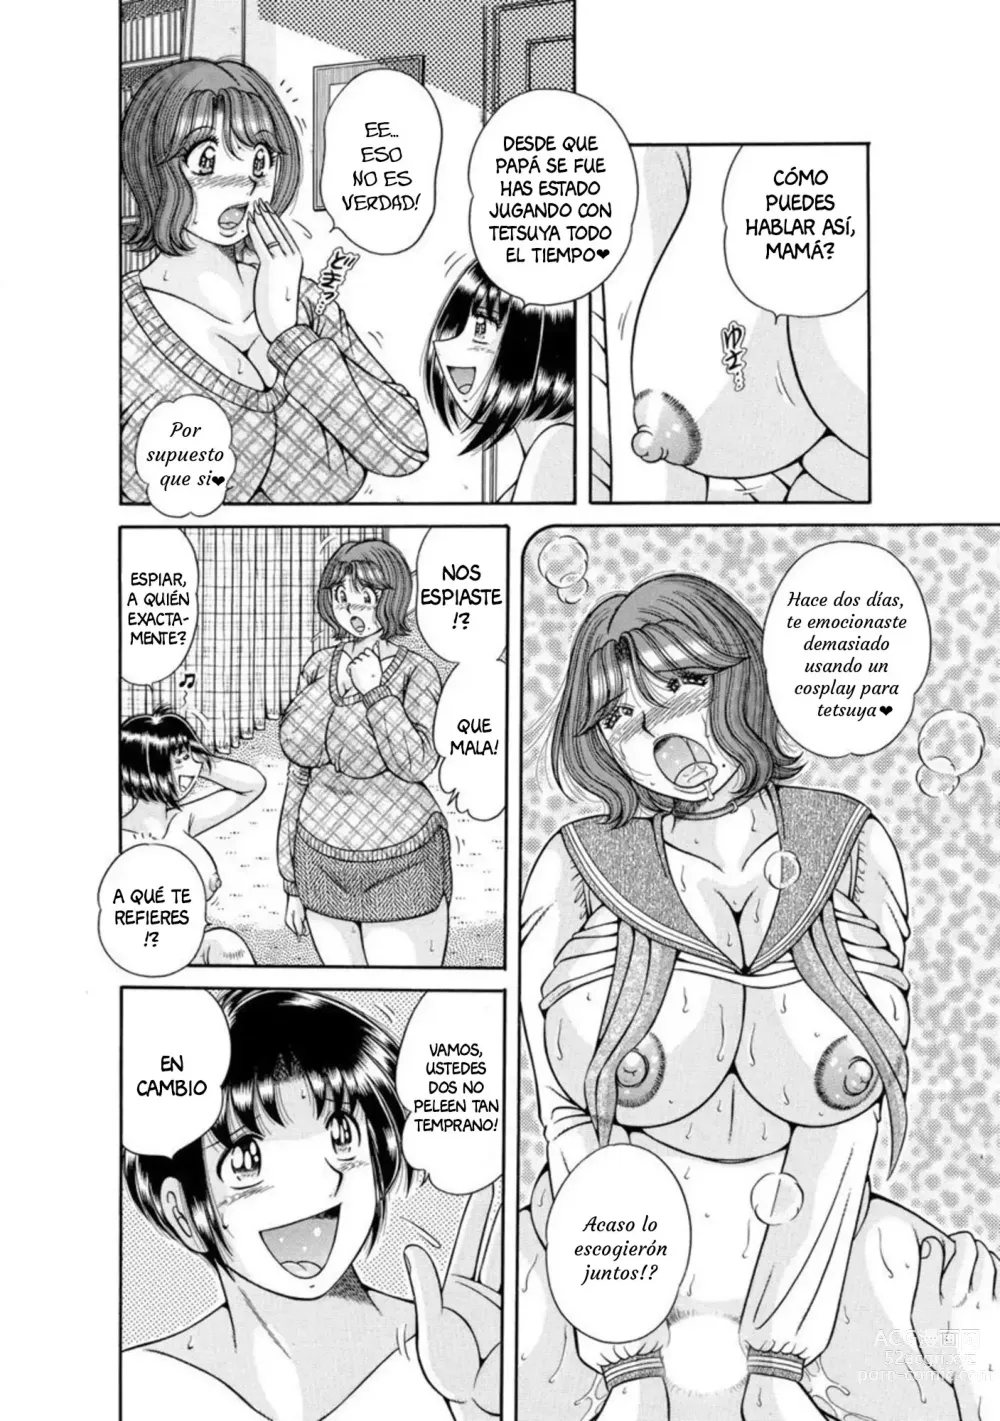 Page 5 of manga Mother and Big and Little Sisters. As Much Sex as You Want, Every Day, With All 5 of Them. Part 1